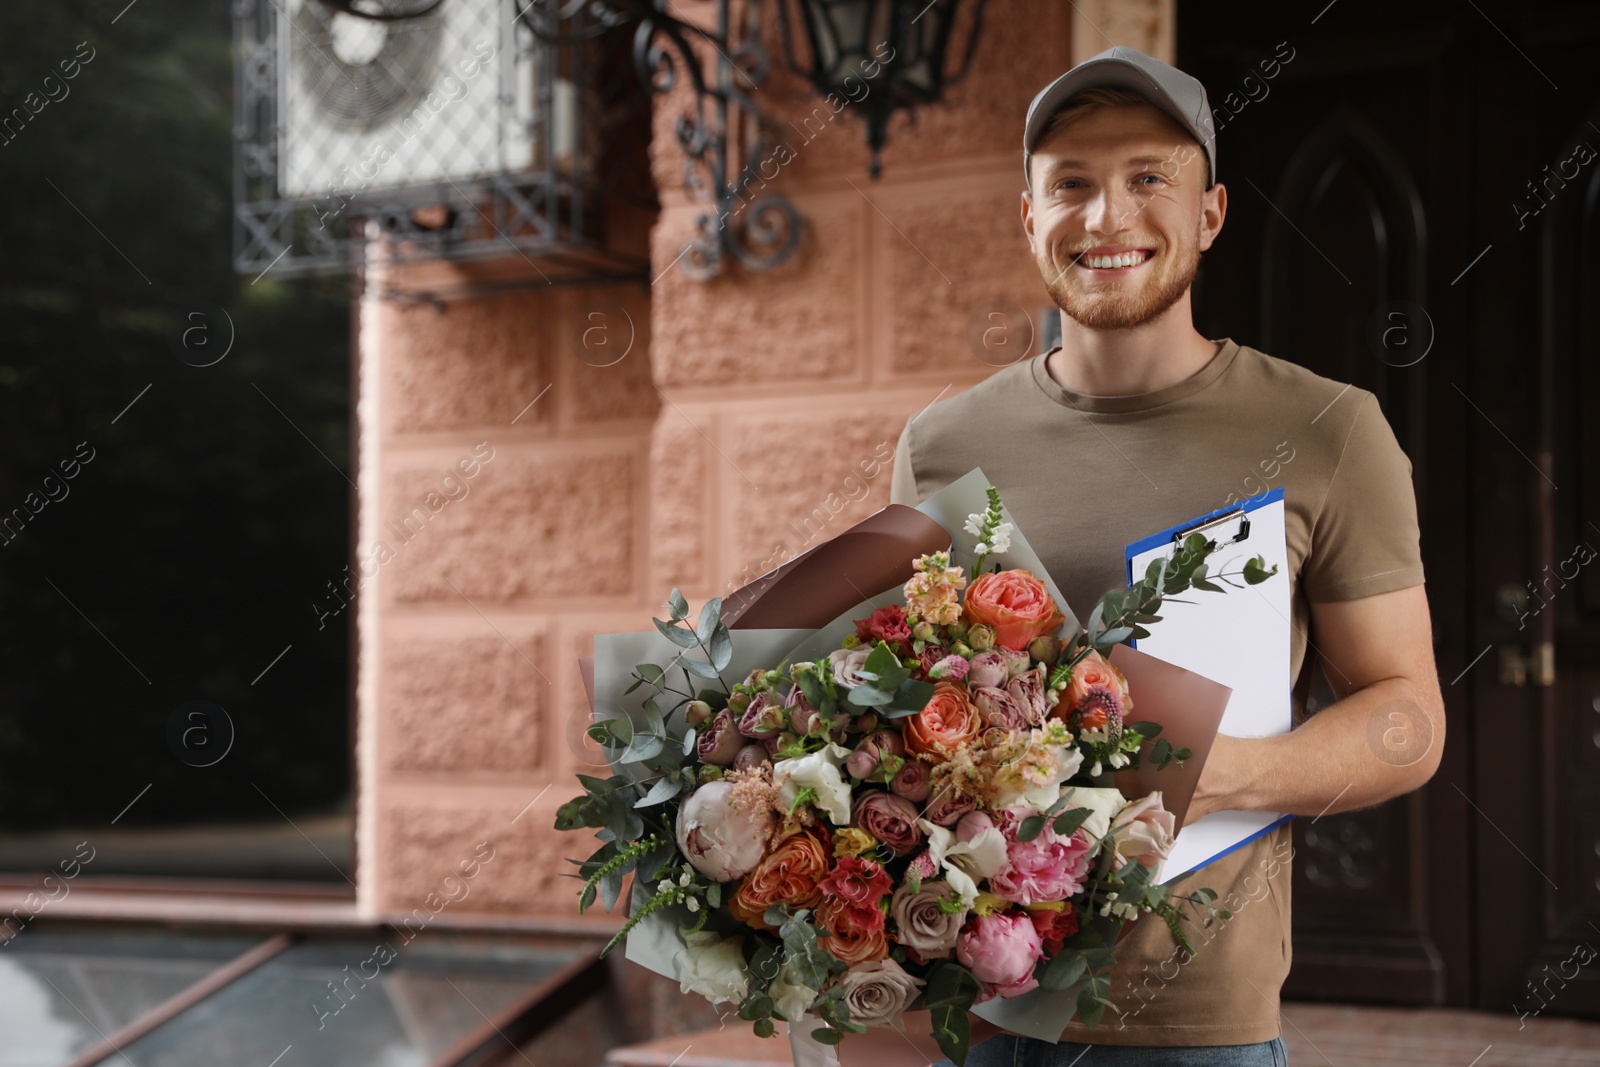 Photo of Happy delivery man with beautiful flower bouquet outdoors